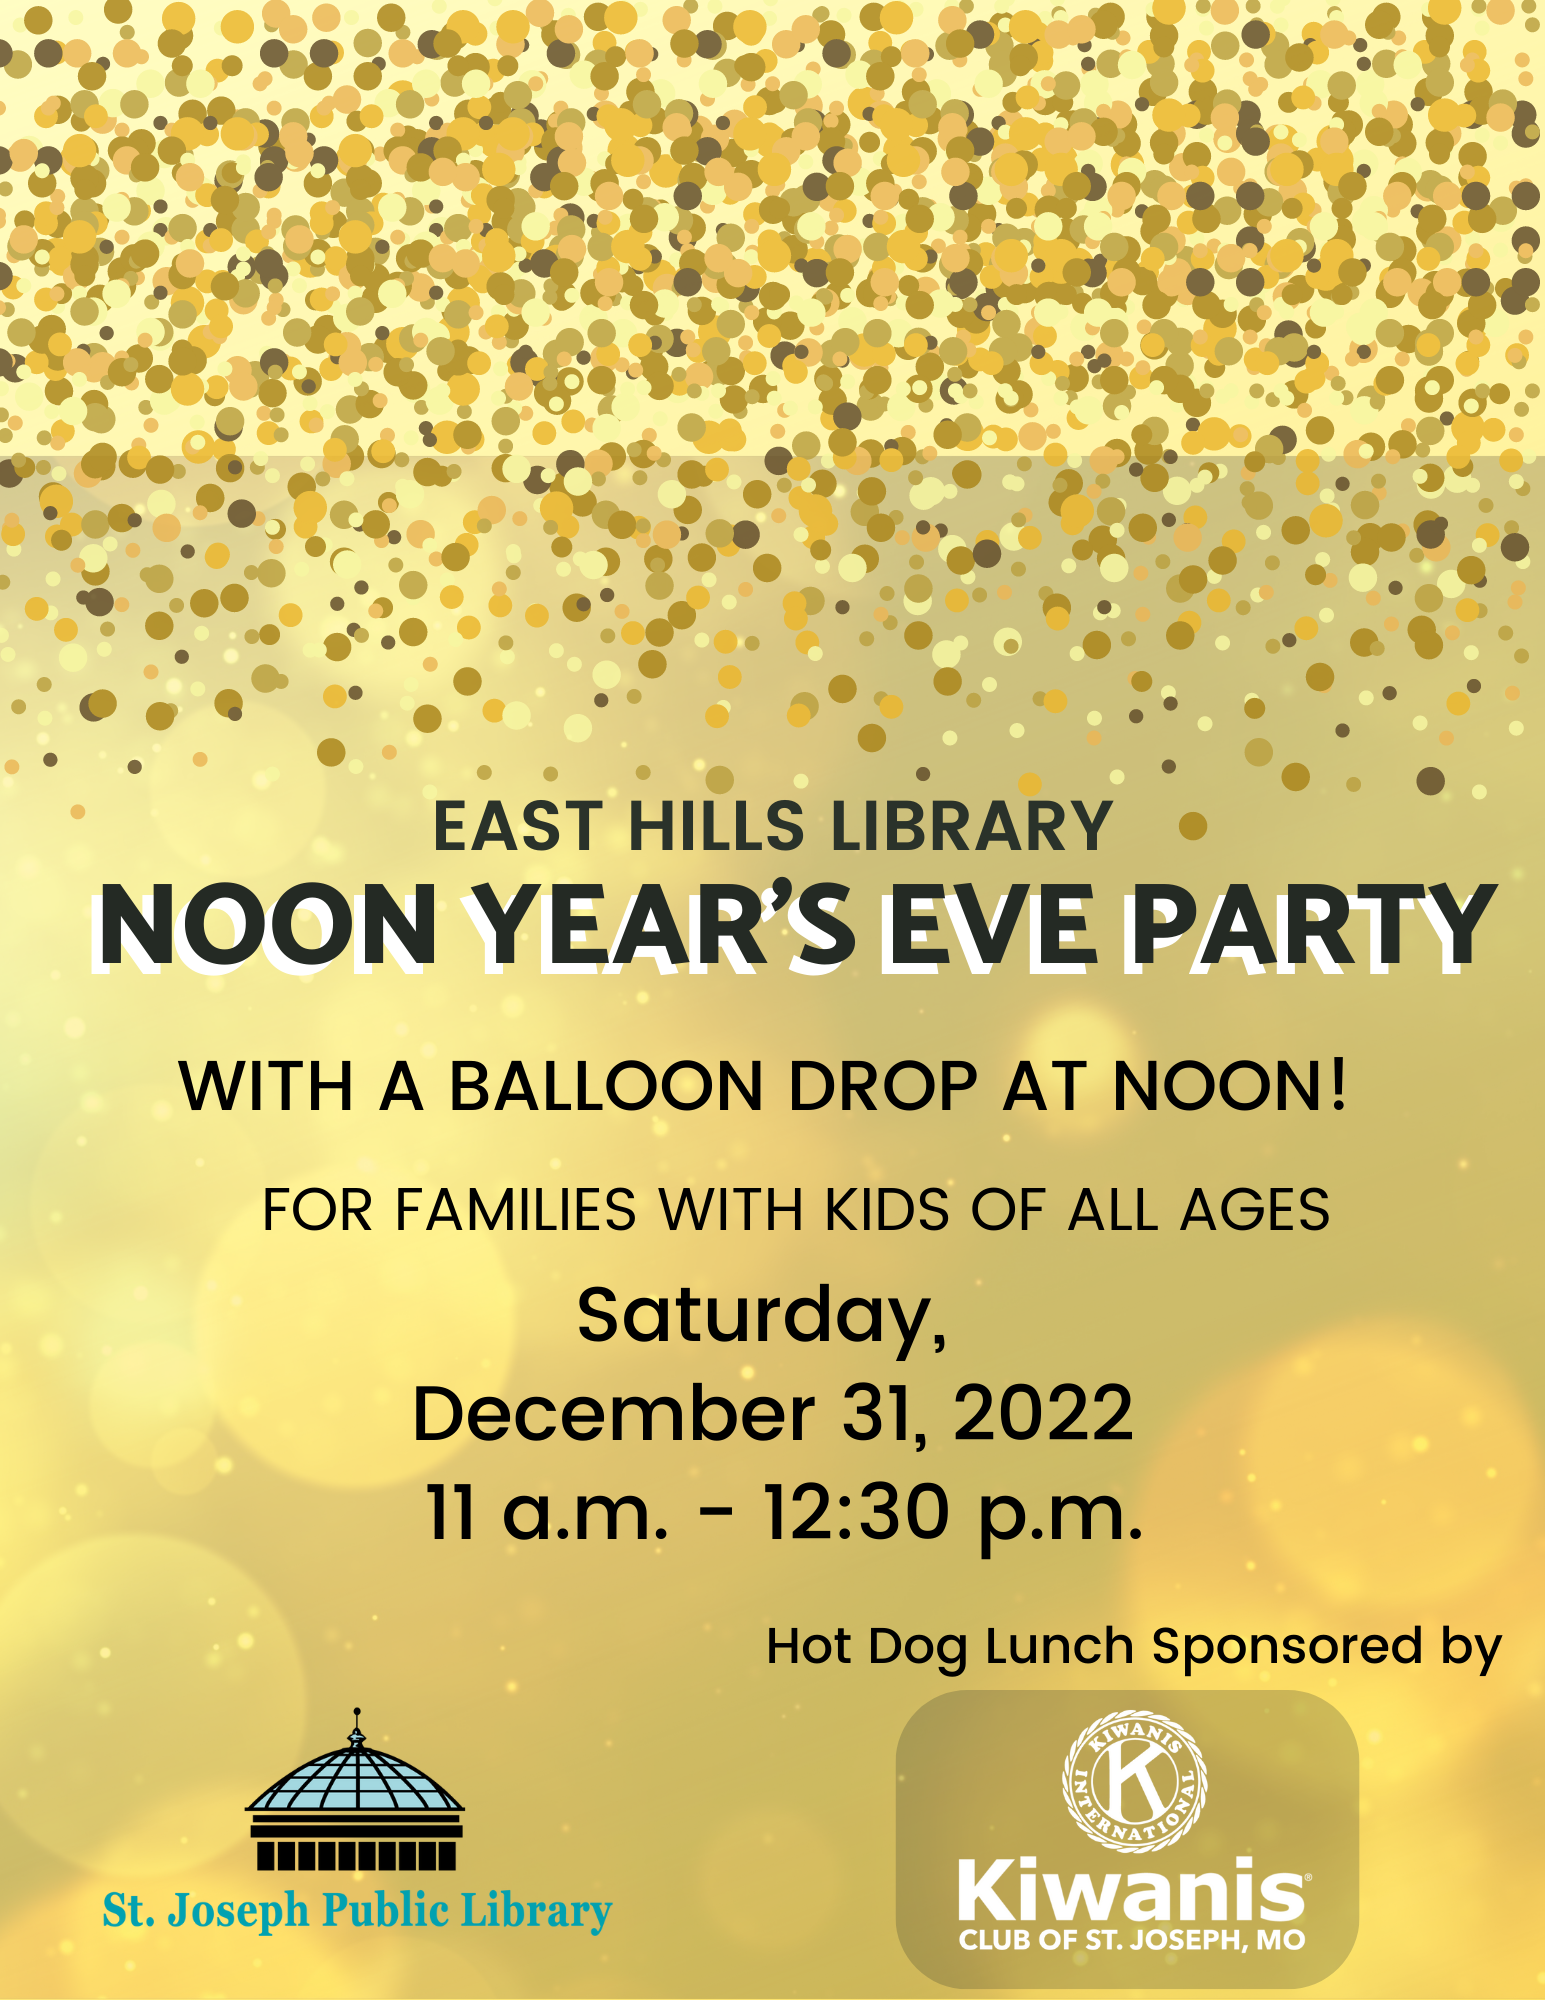 East Hills Library Noon Year's Eve Party Balloon Drop at Noon